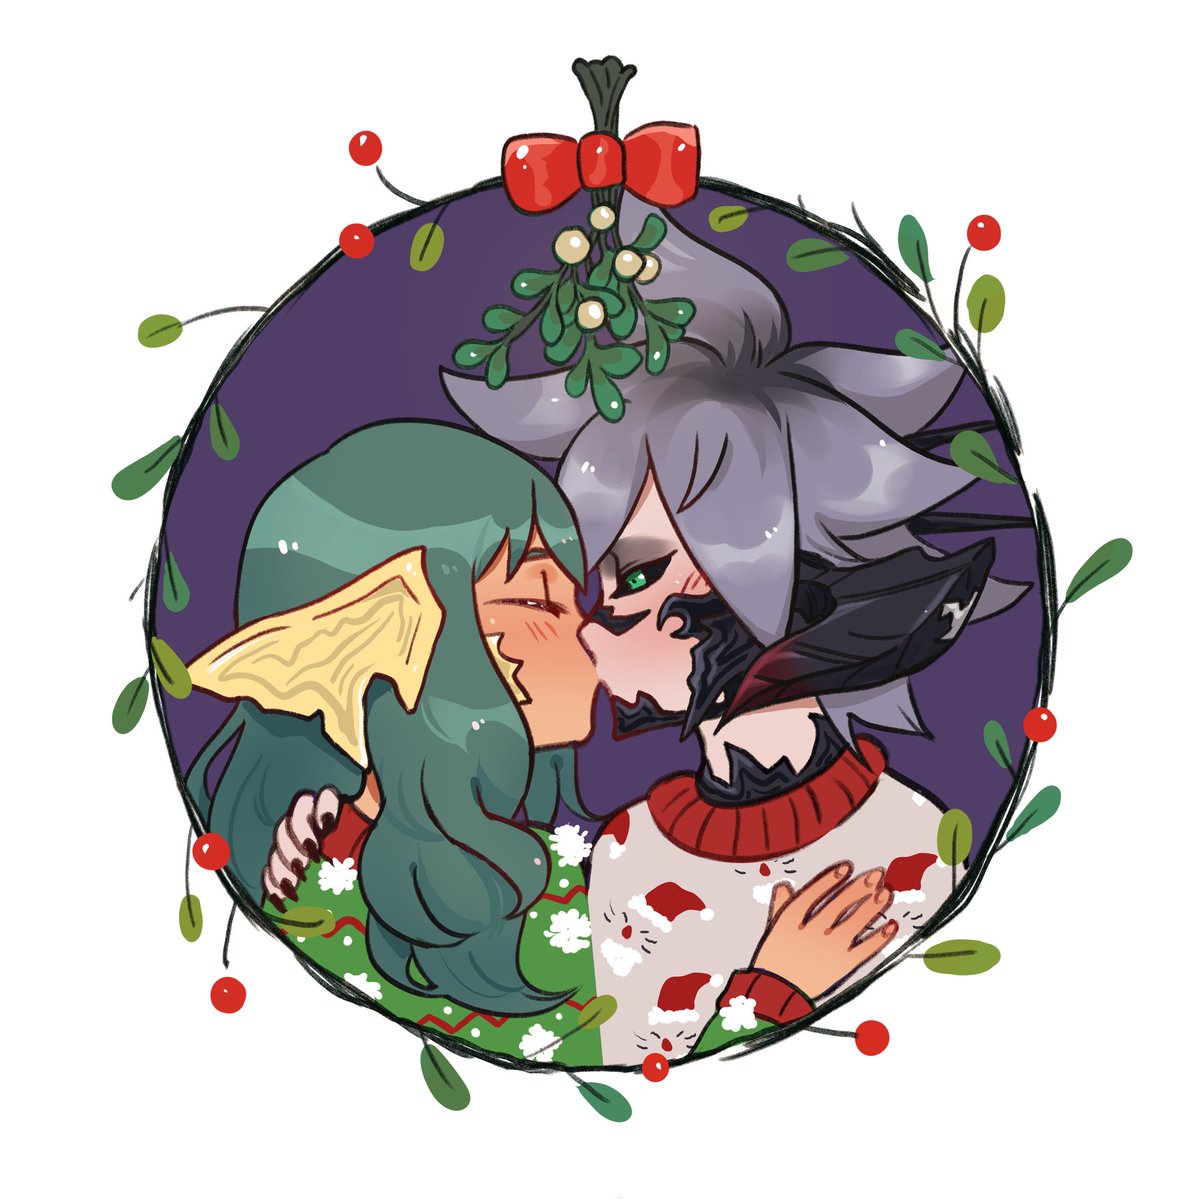 Xmas Sidrika by the wonderful @lapineknight!!! I'm SO happy, I can't stop staring, they did such an amazing job!! I am holding Sid and Eirika in my hands forever!!!